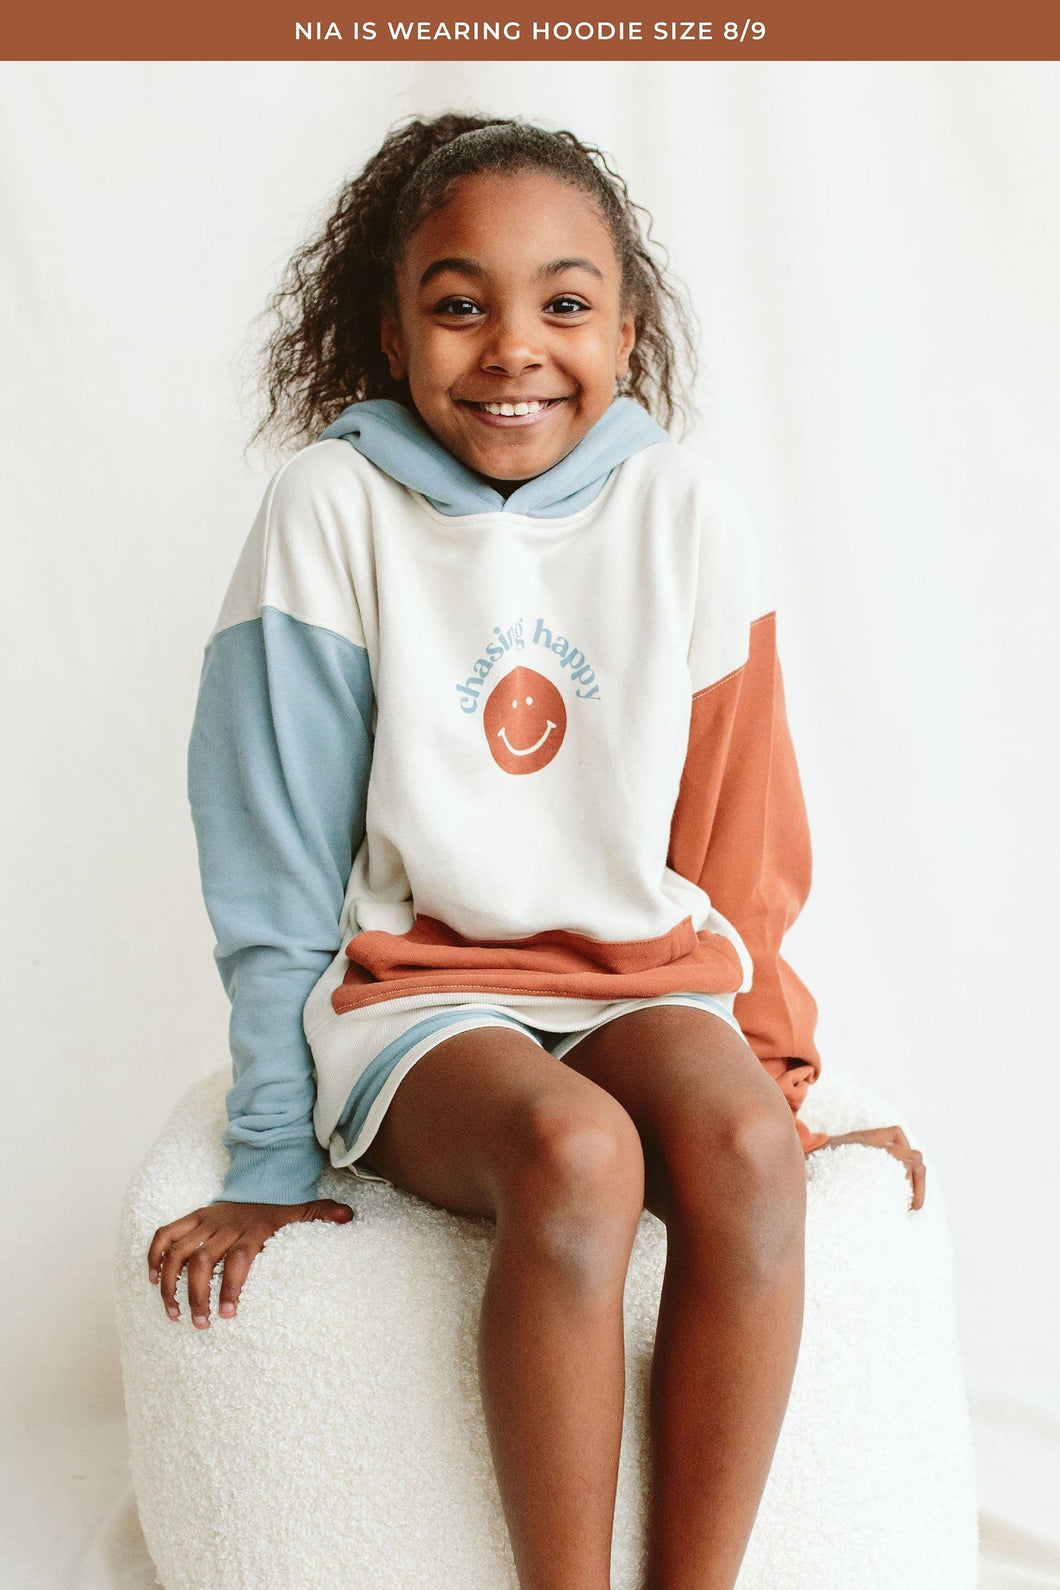 goumikids 2-3T HOODIE | CHASING HAPPY by goumikids